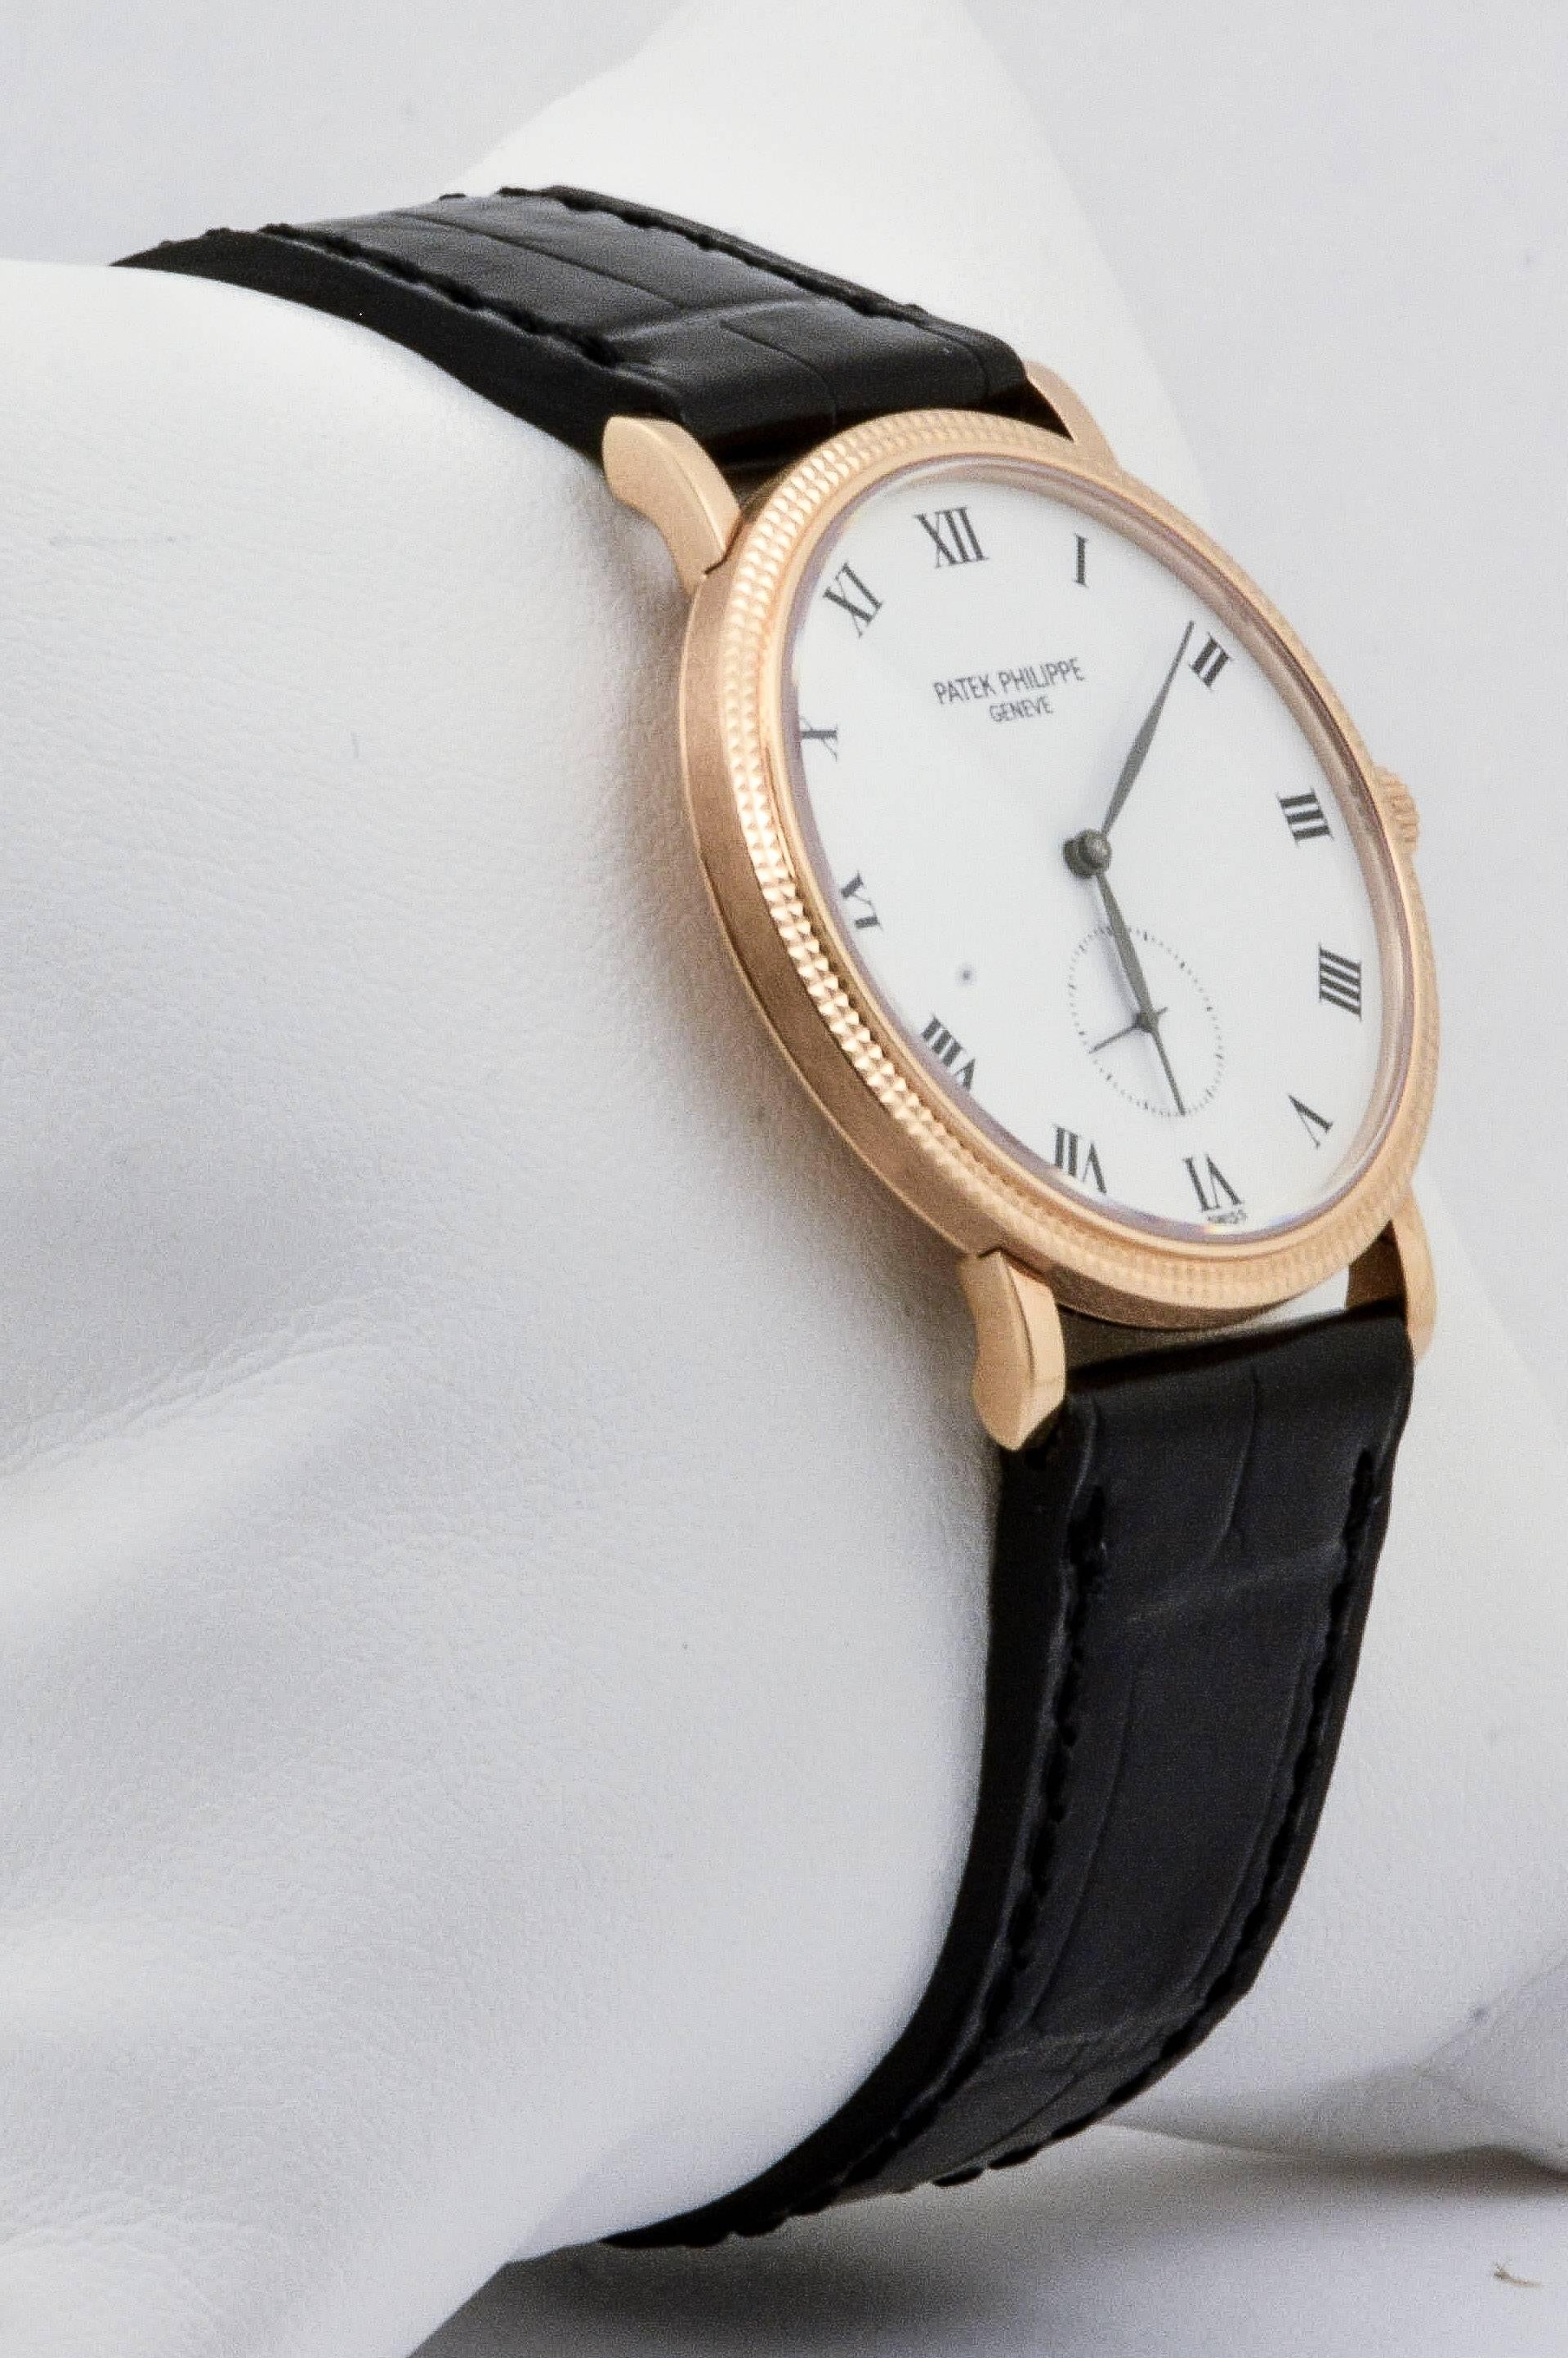 This certified pre-owned Patek Philippe Calatrava 33mm watch is artfully designed to accentuate its 18kt rose gold with a shimmering white dial face. This watch features Roman numeral dial markers, a hobnail bezel, a sapphire crystal, and a sleek